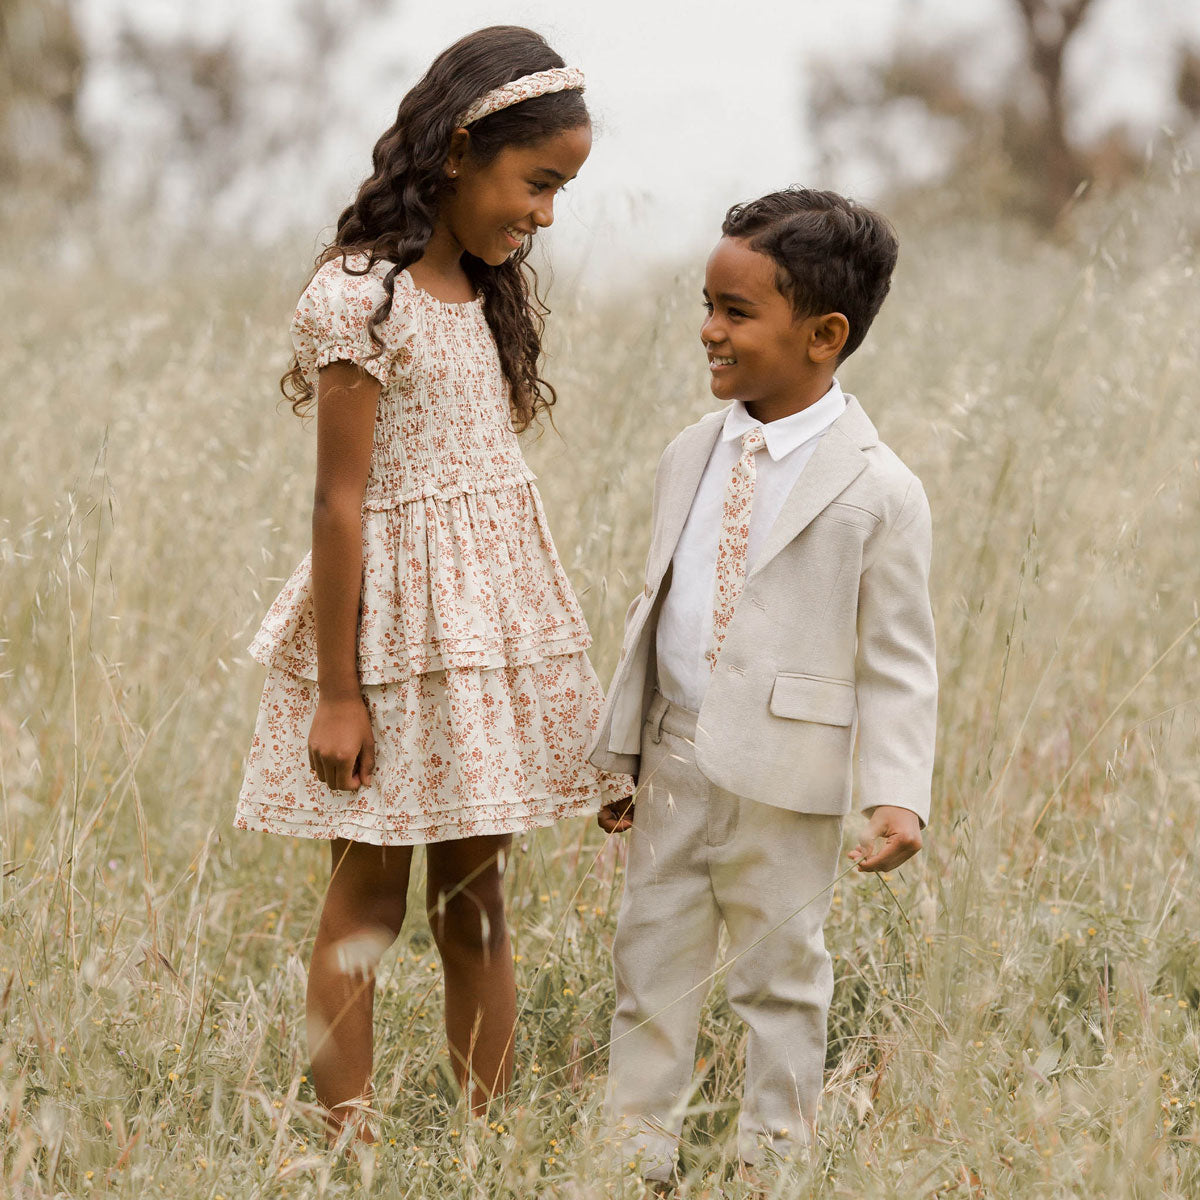 Boy standing next to girl while wearing Noralee Skinny Tie - Vines - Berry / Natural